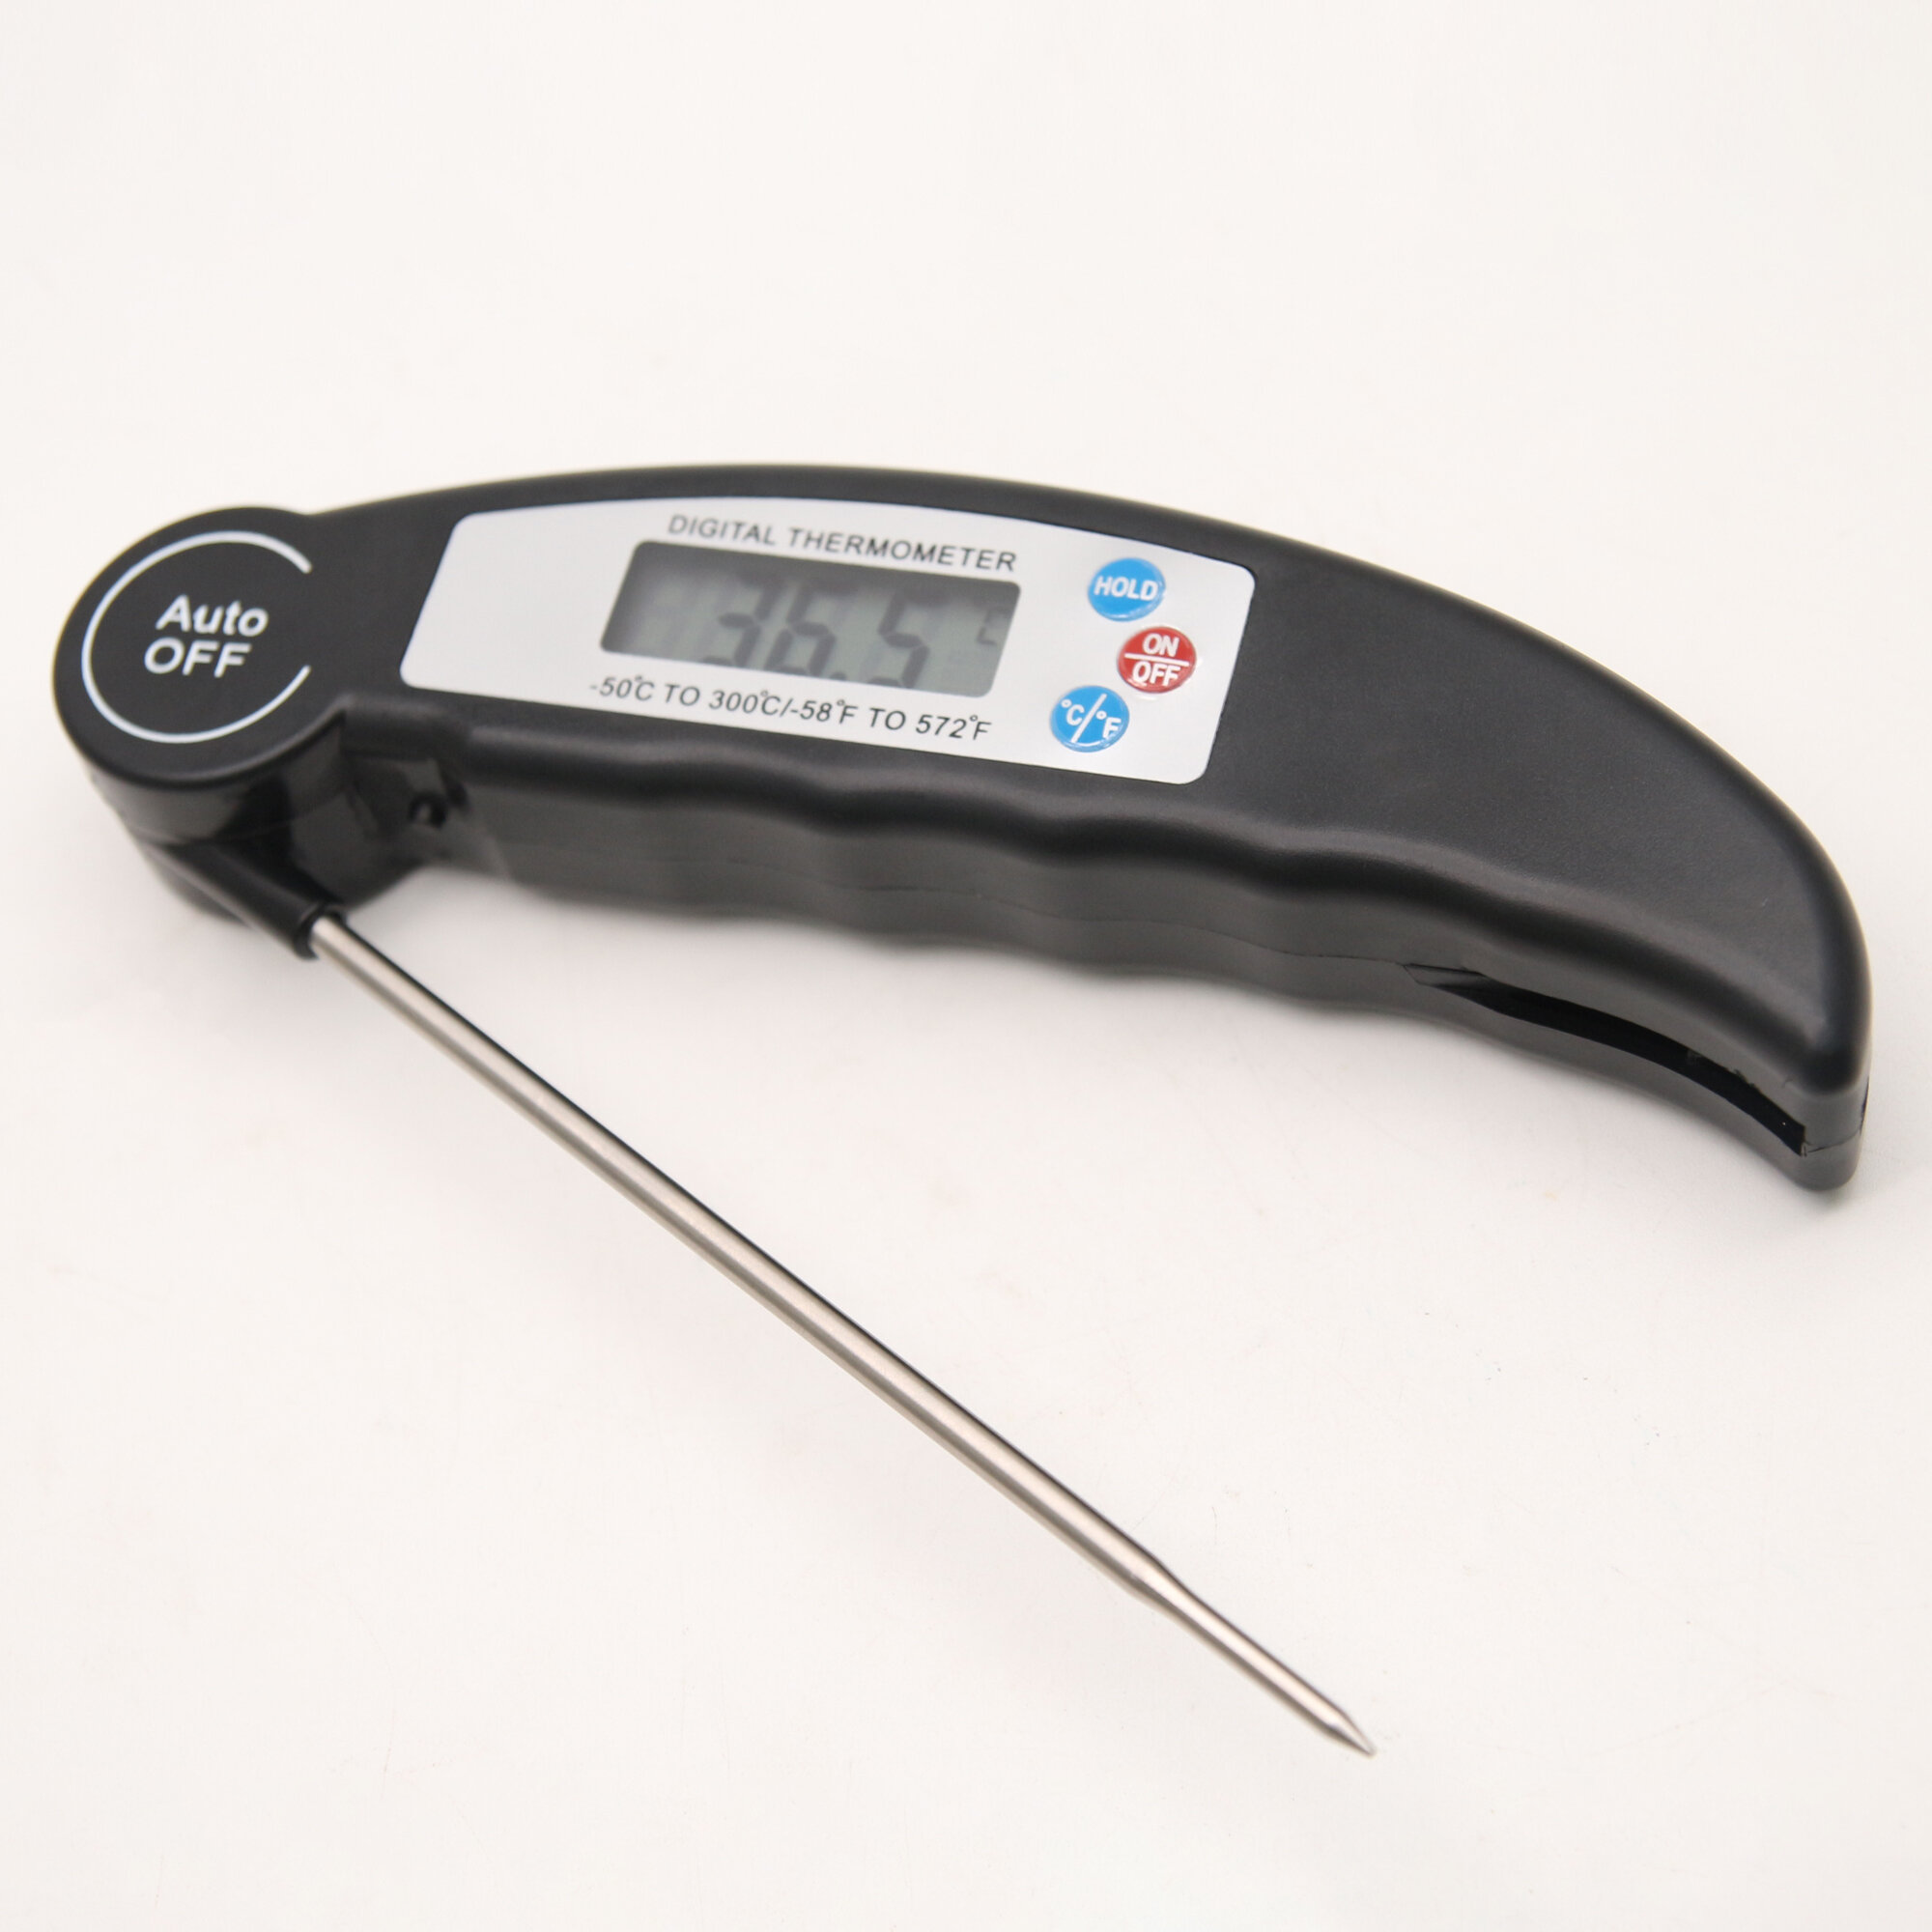 Taylor Digital Folding Probe Thermometer with Backlight, Black